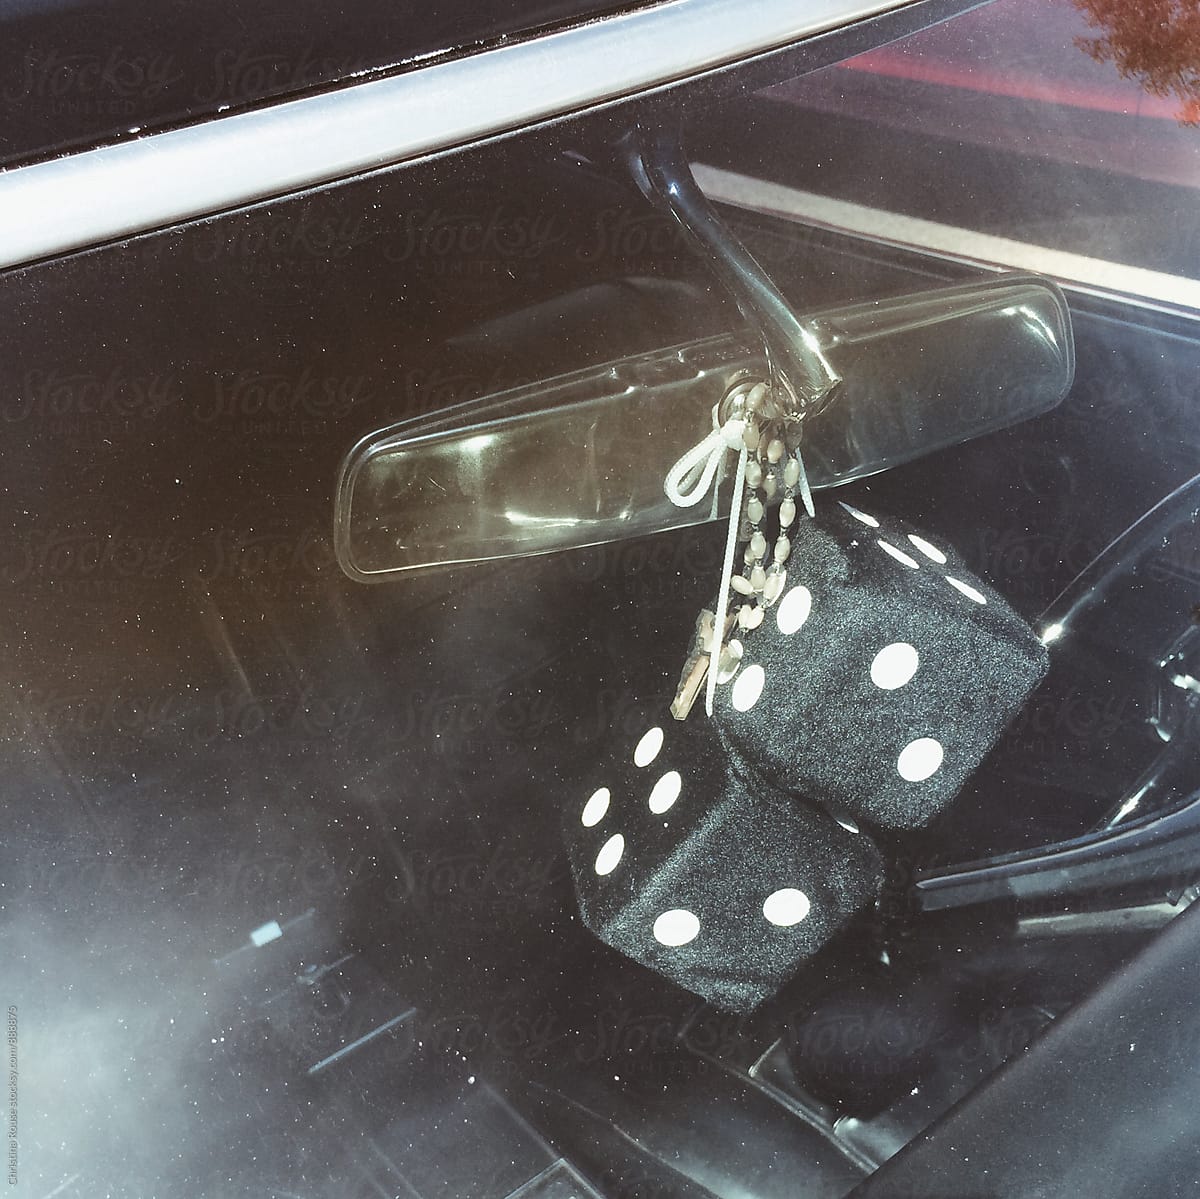 Fuzzy dice hanging from a car's rear view mirror